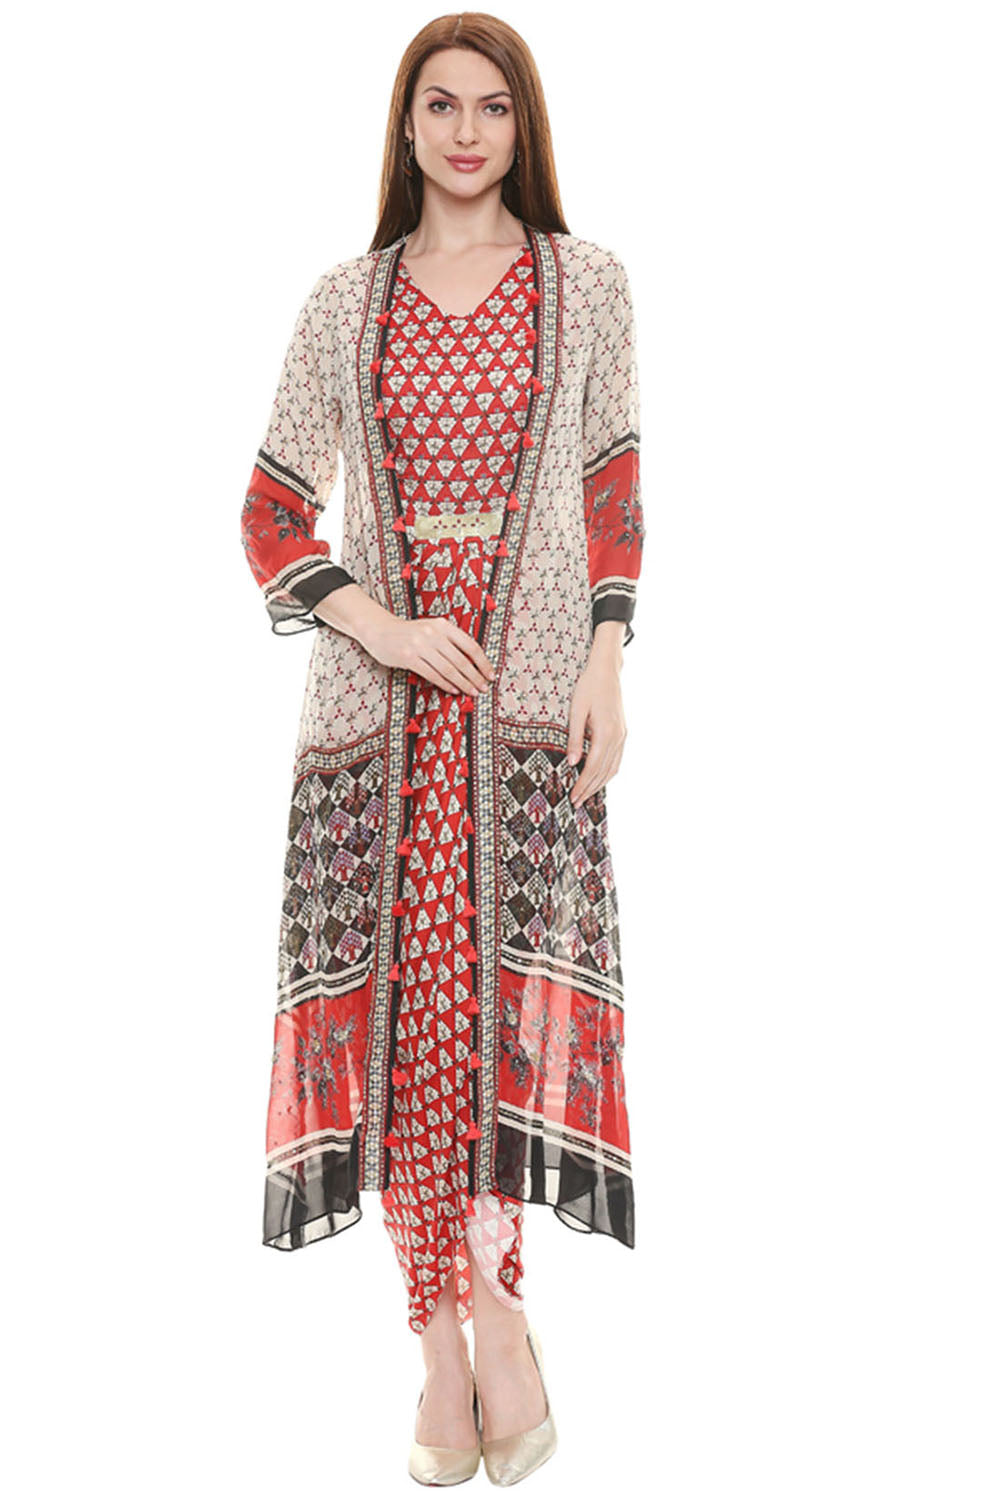 Applique Printed Dress With Jacket